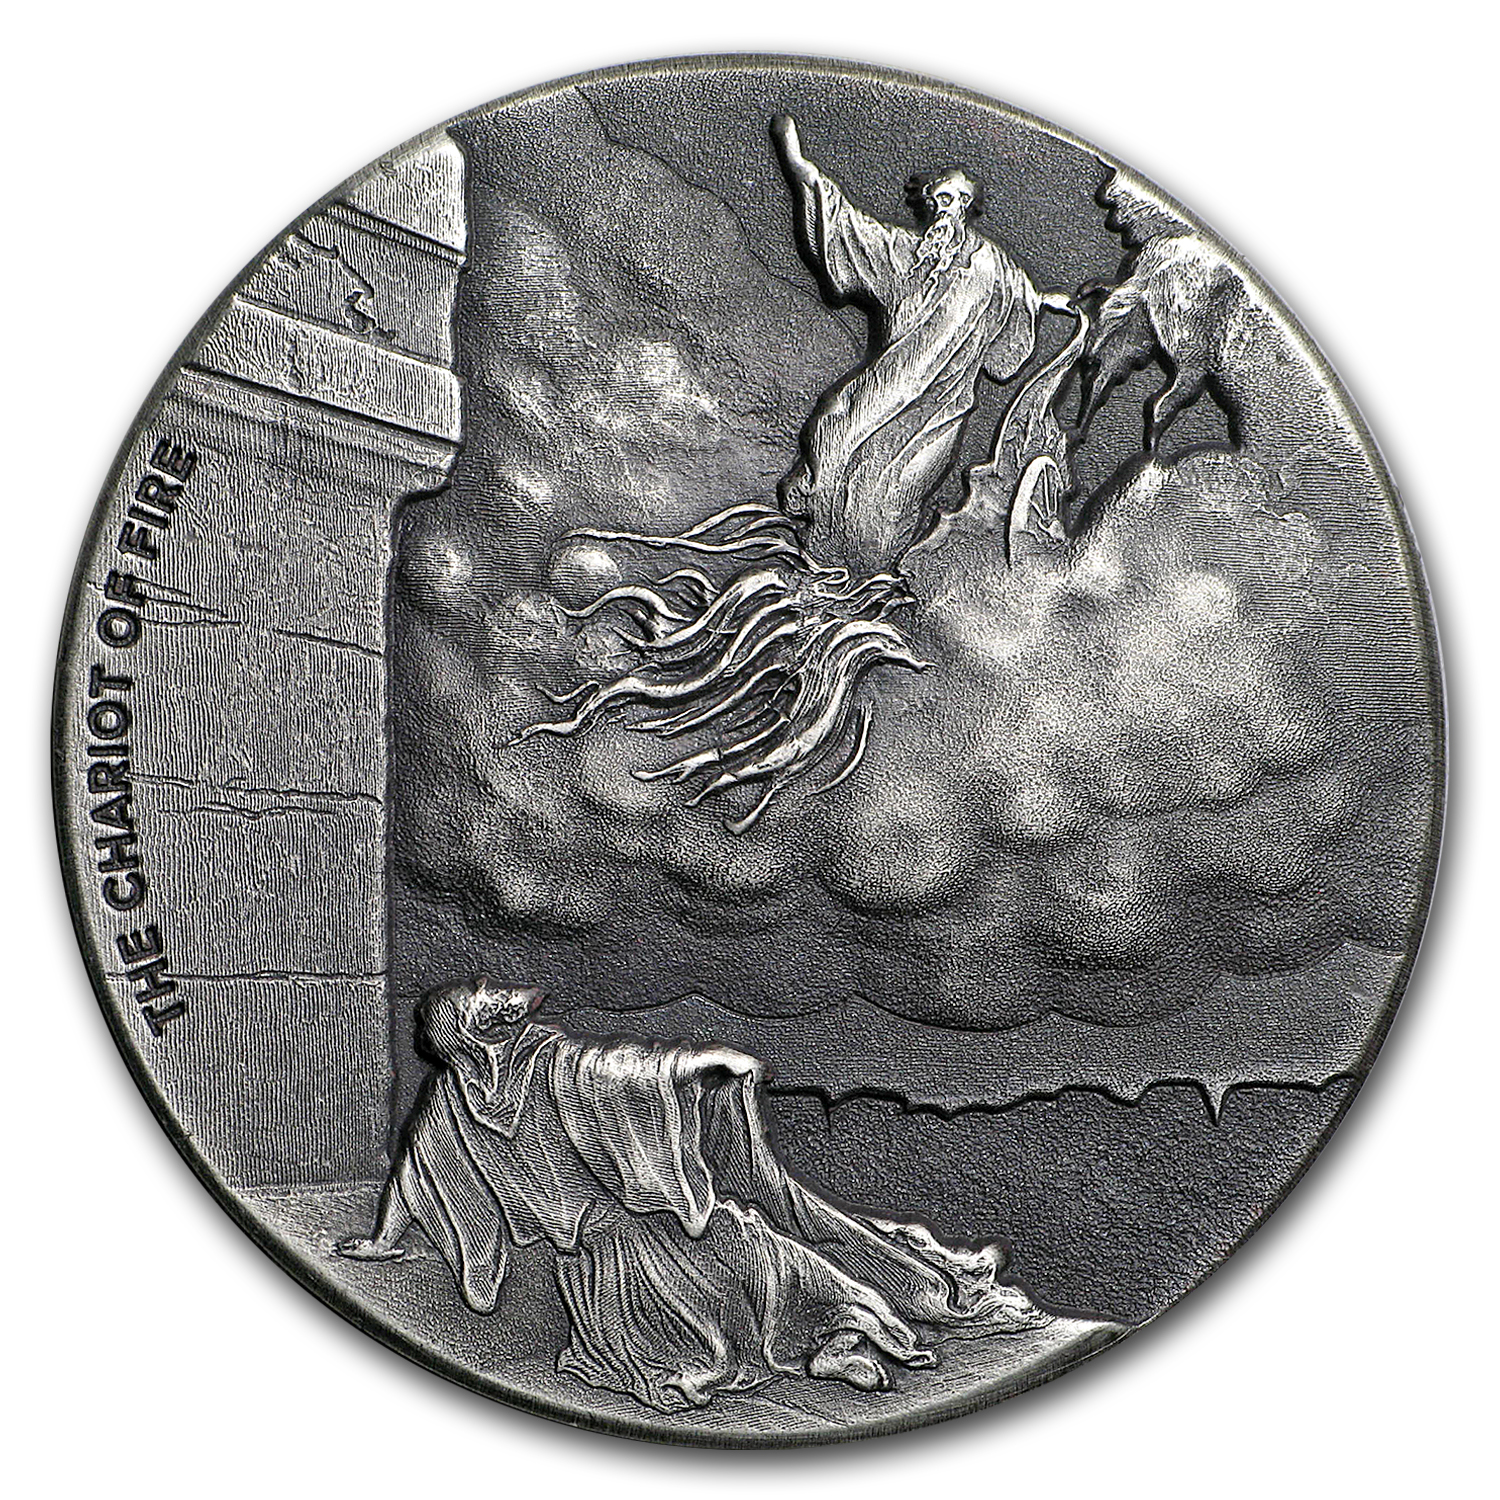 Buy 2018 2 oz Silver Coin - Biblical Series (Chariot of Fire) - Click Image to Close